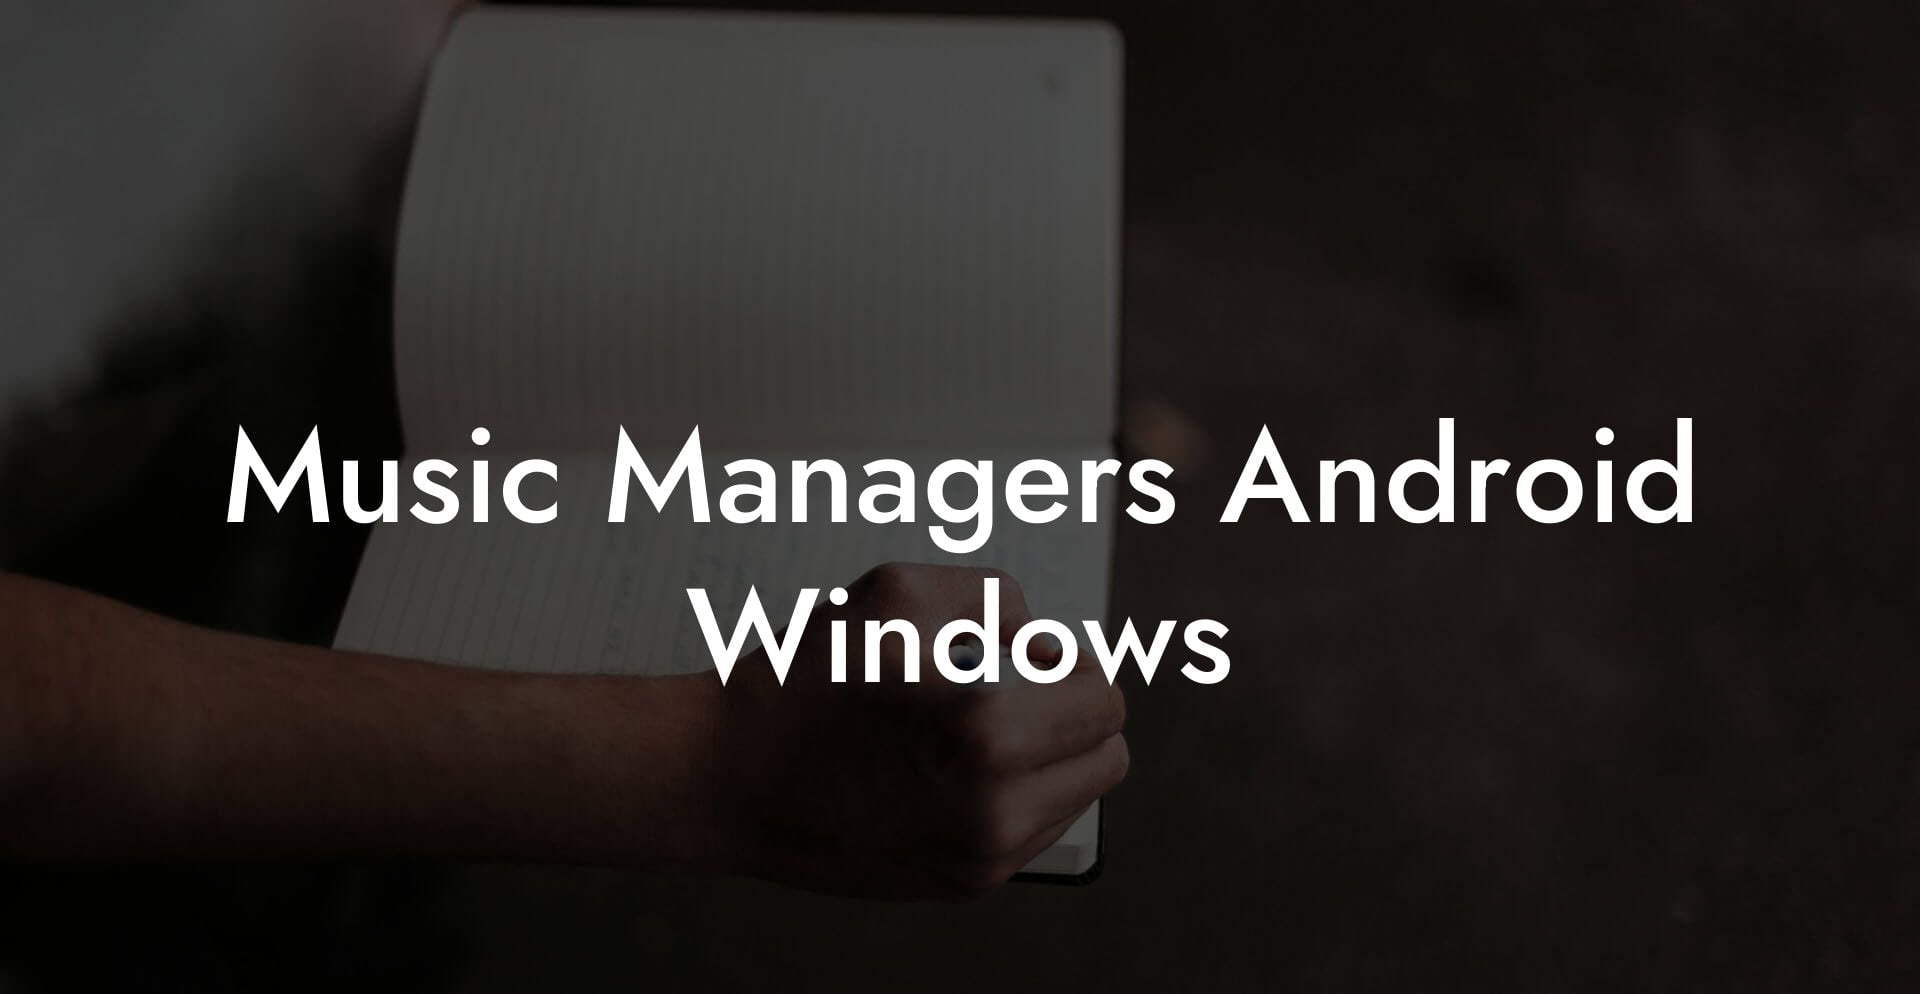 Music Managers Android Windows